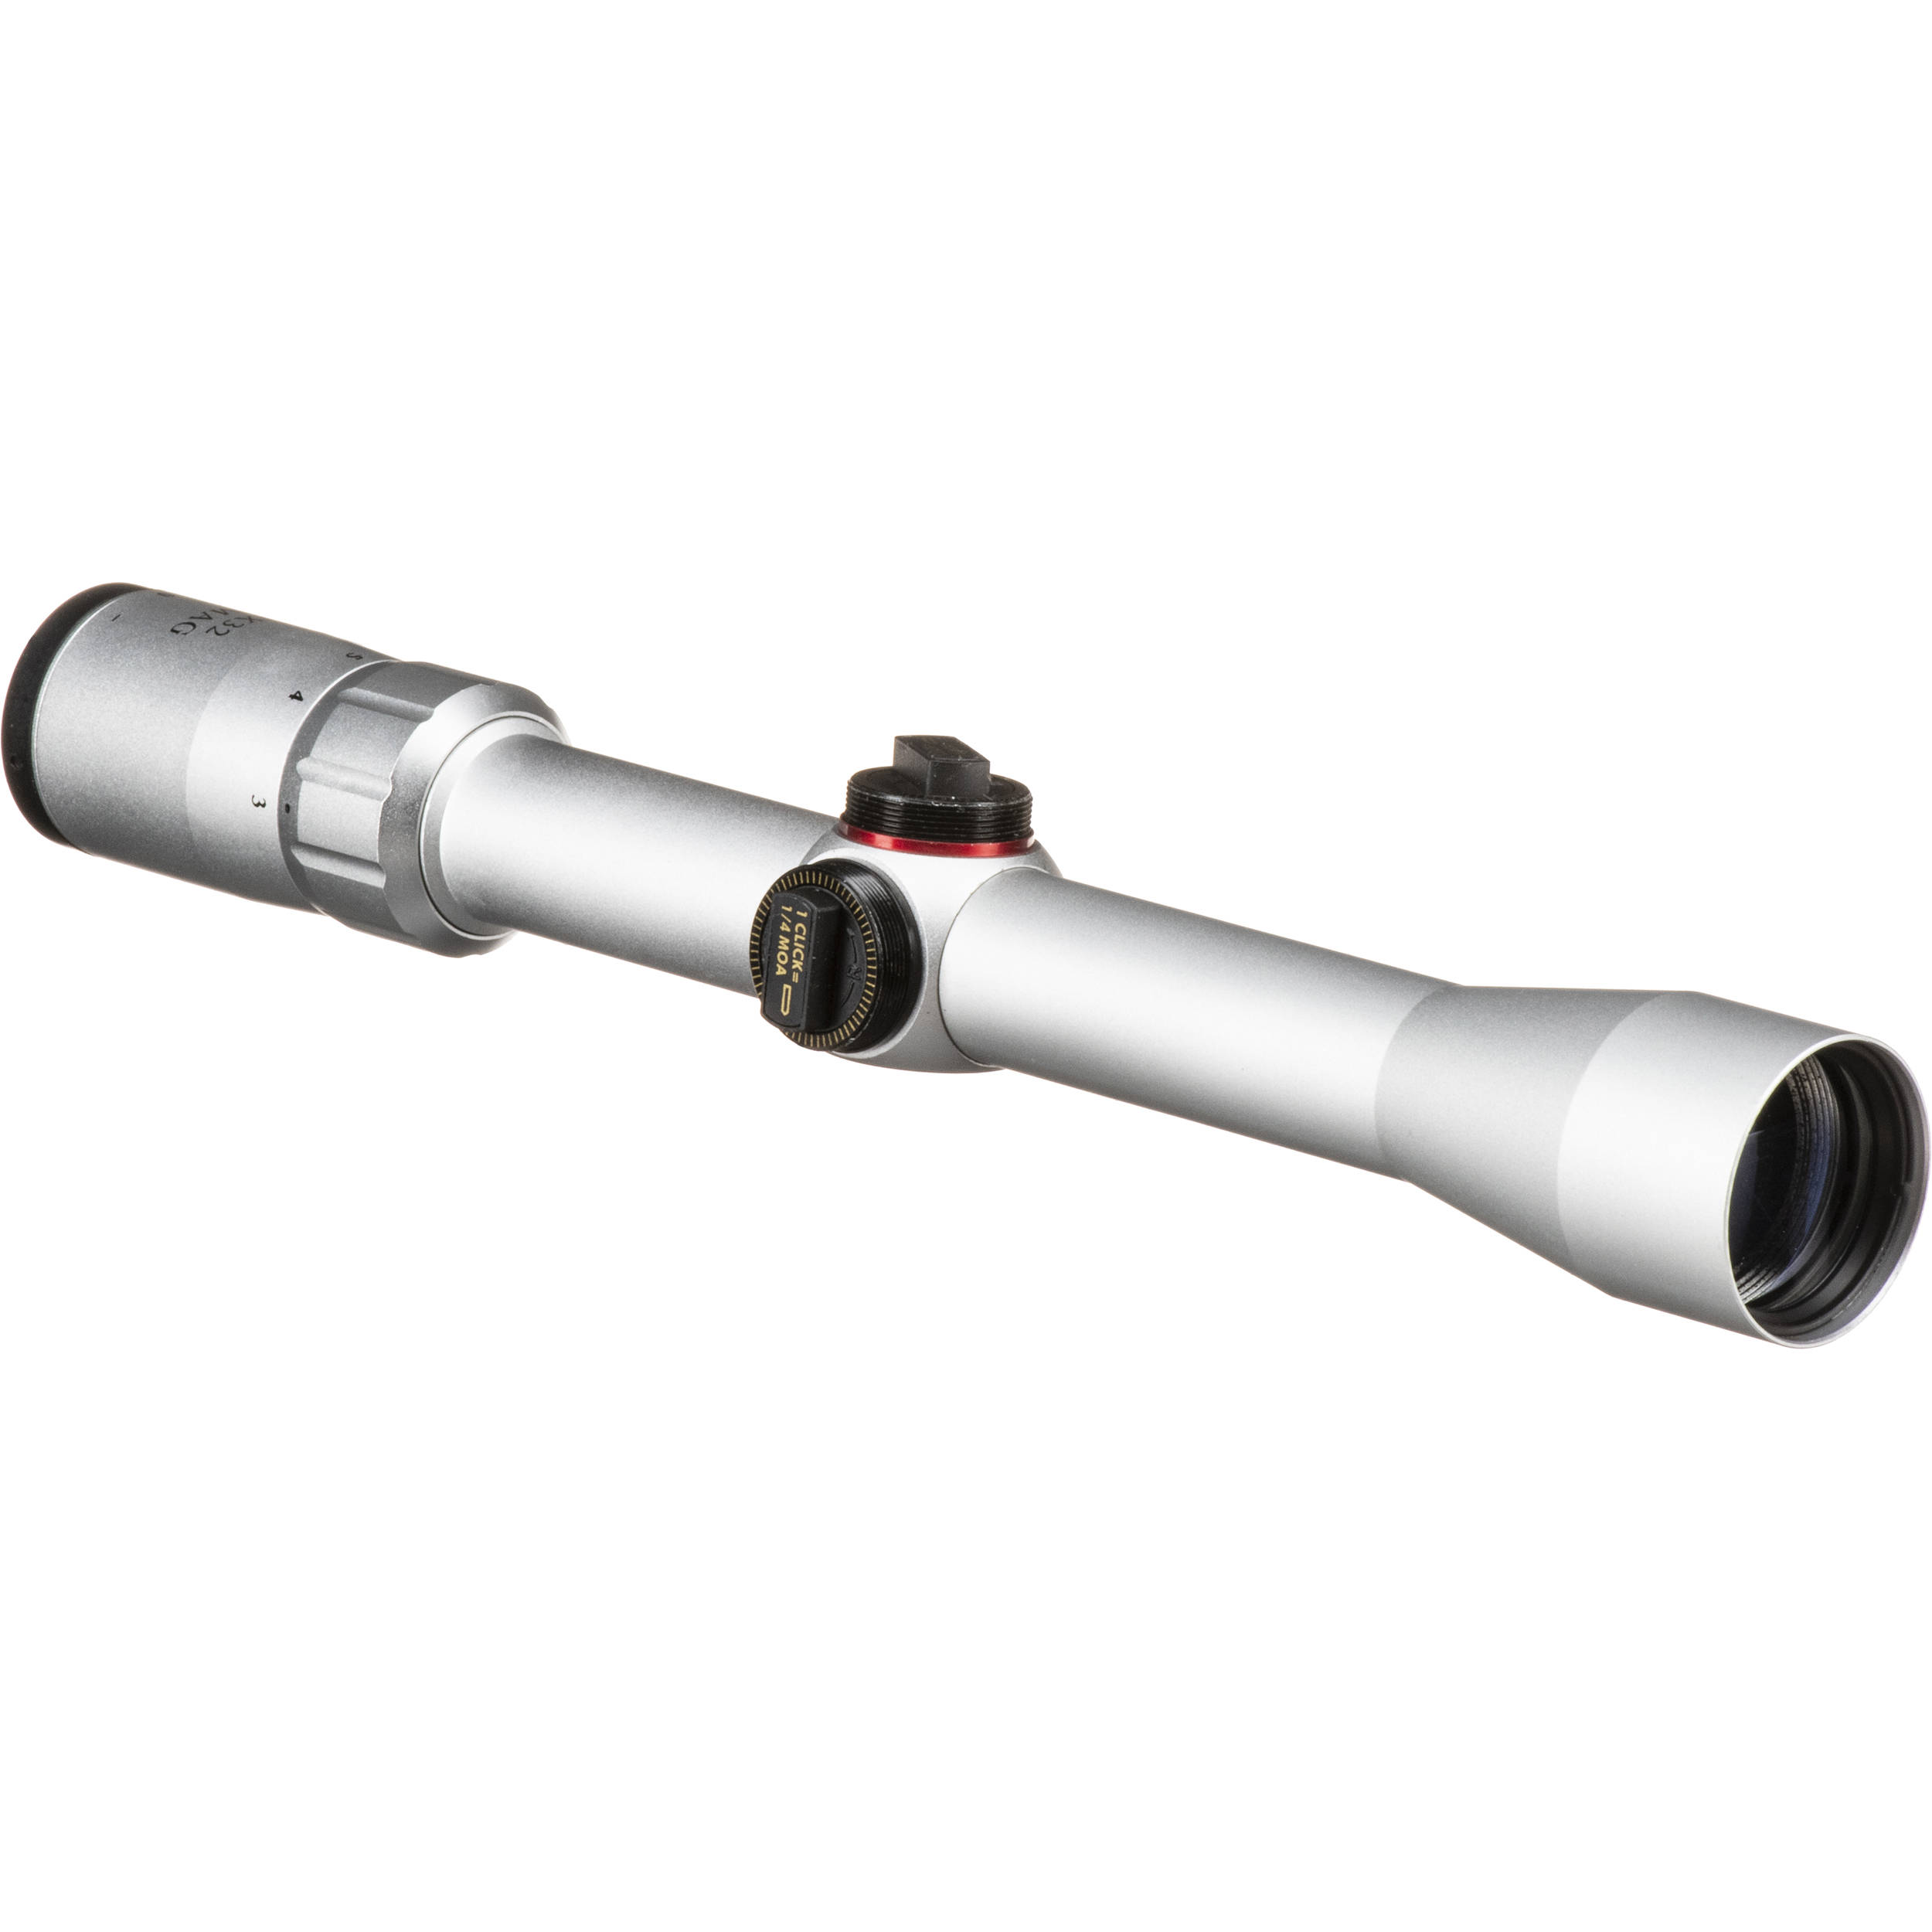 4x32mm Simmons .22 Mag TruPlex Reticle Rimfire Riflescope with Rings Silver.